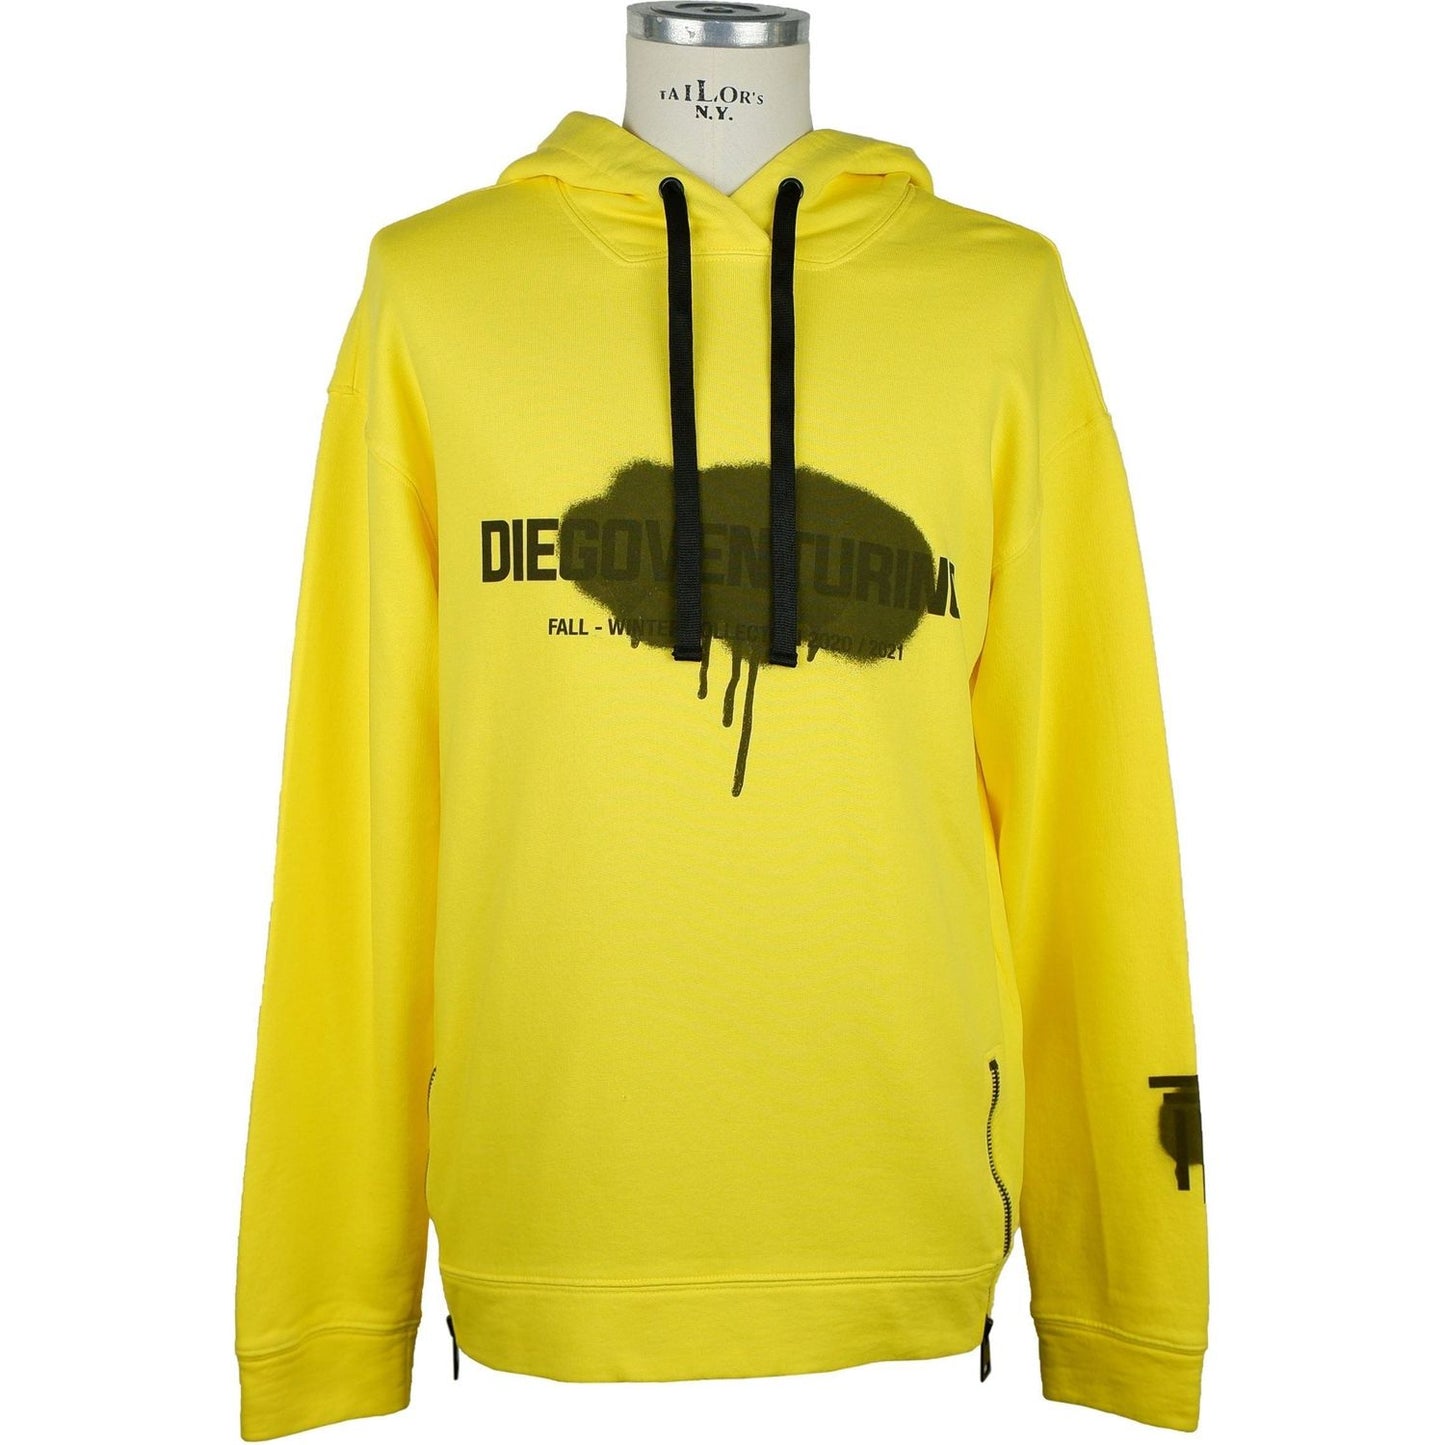 Diego Venturino Elevate Your Style: Sunshine Yellow Cotton Hoodie MAN SWEATERS dndflhlvs-yellow-diego-venturino-sweater product-6841-593960043-scaled-5d8ab3ef-a23.jpg